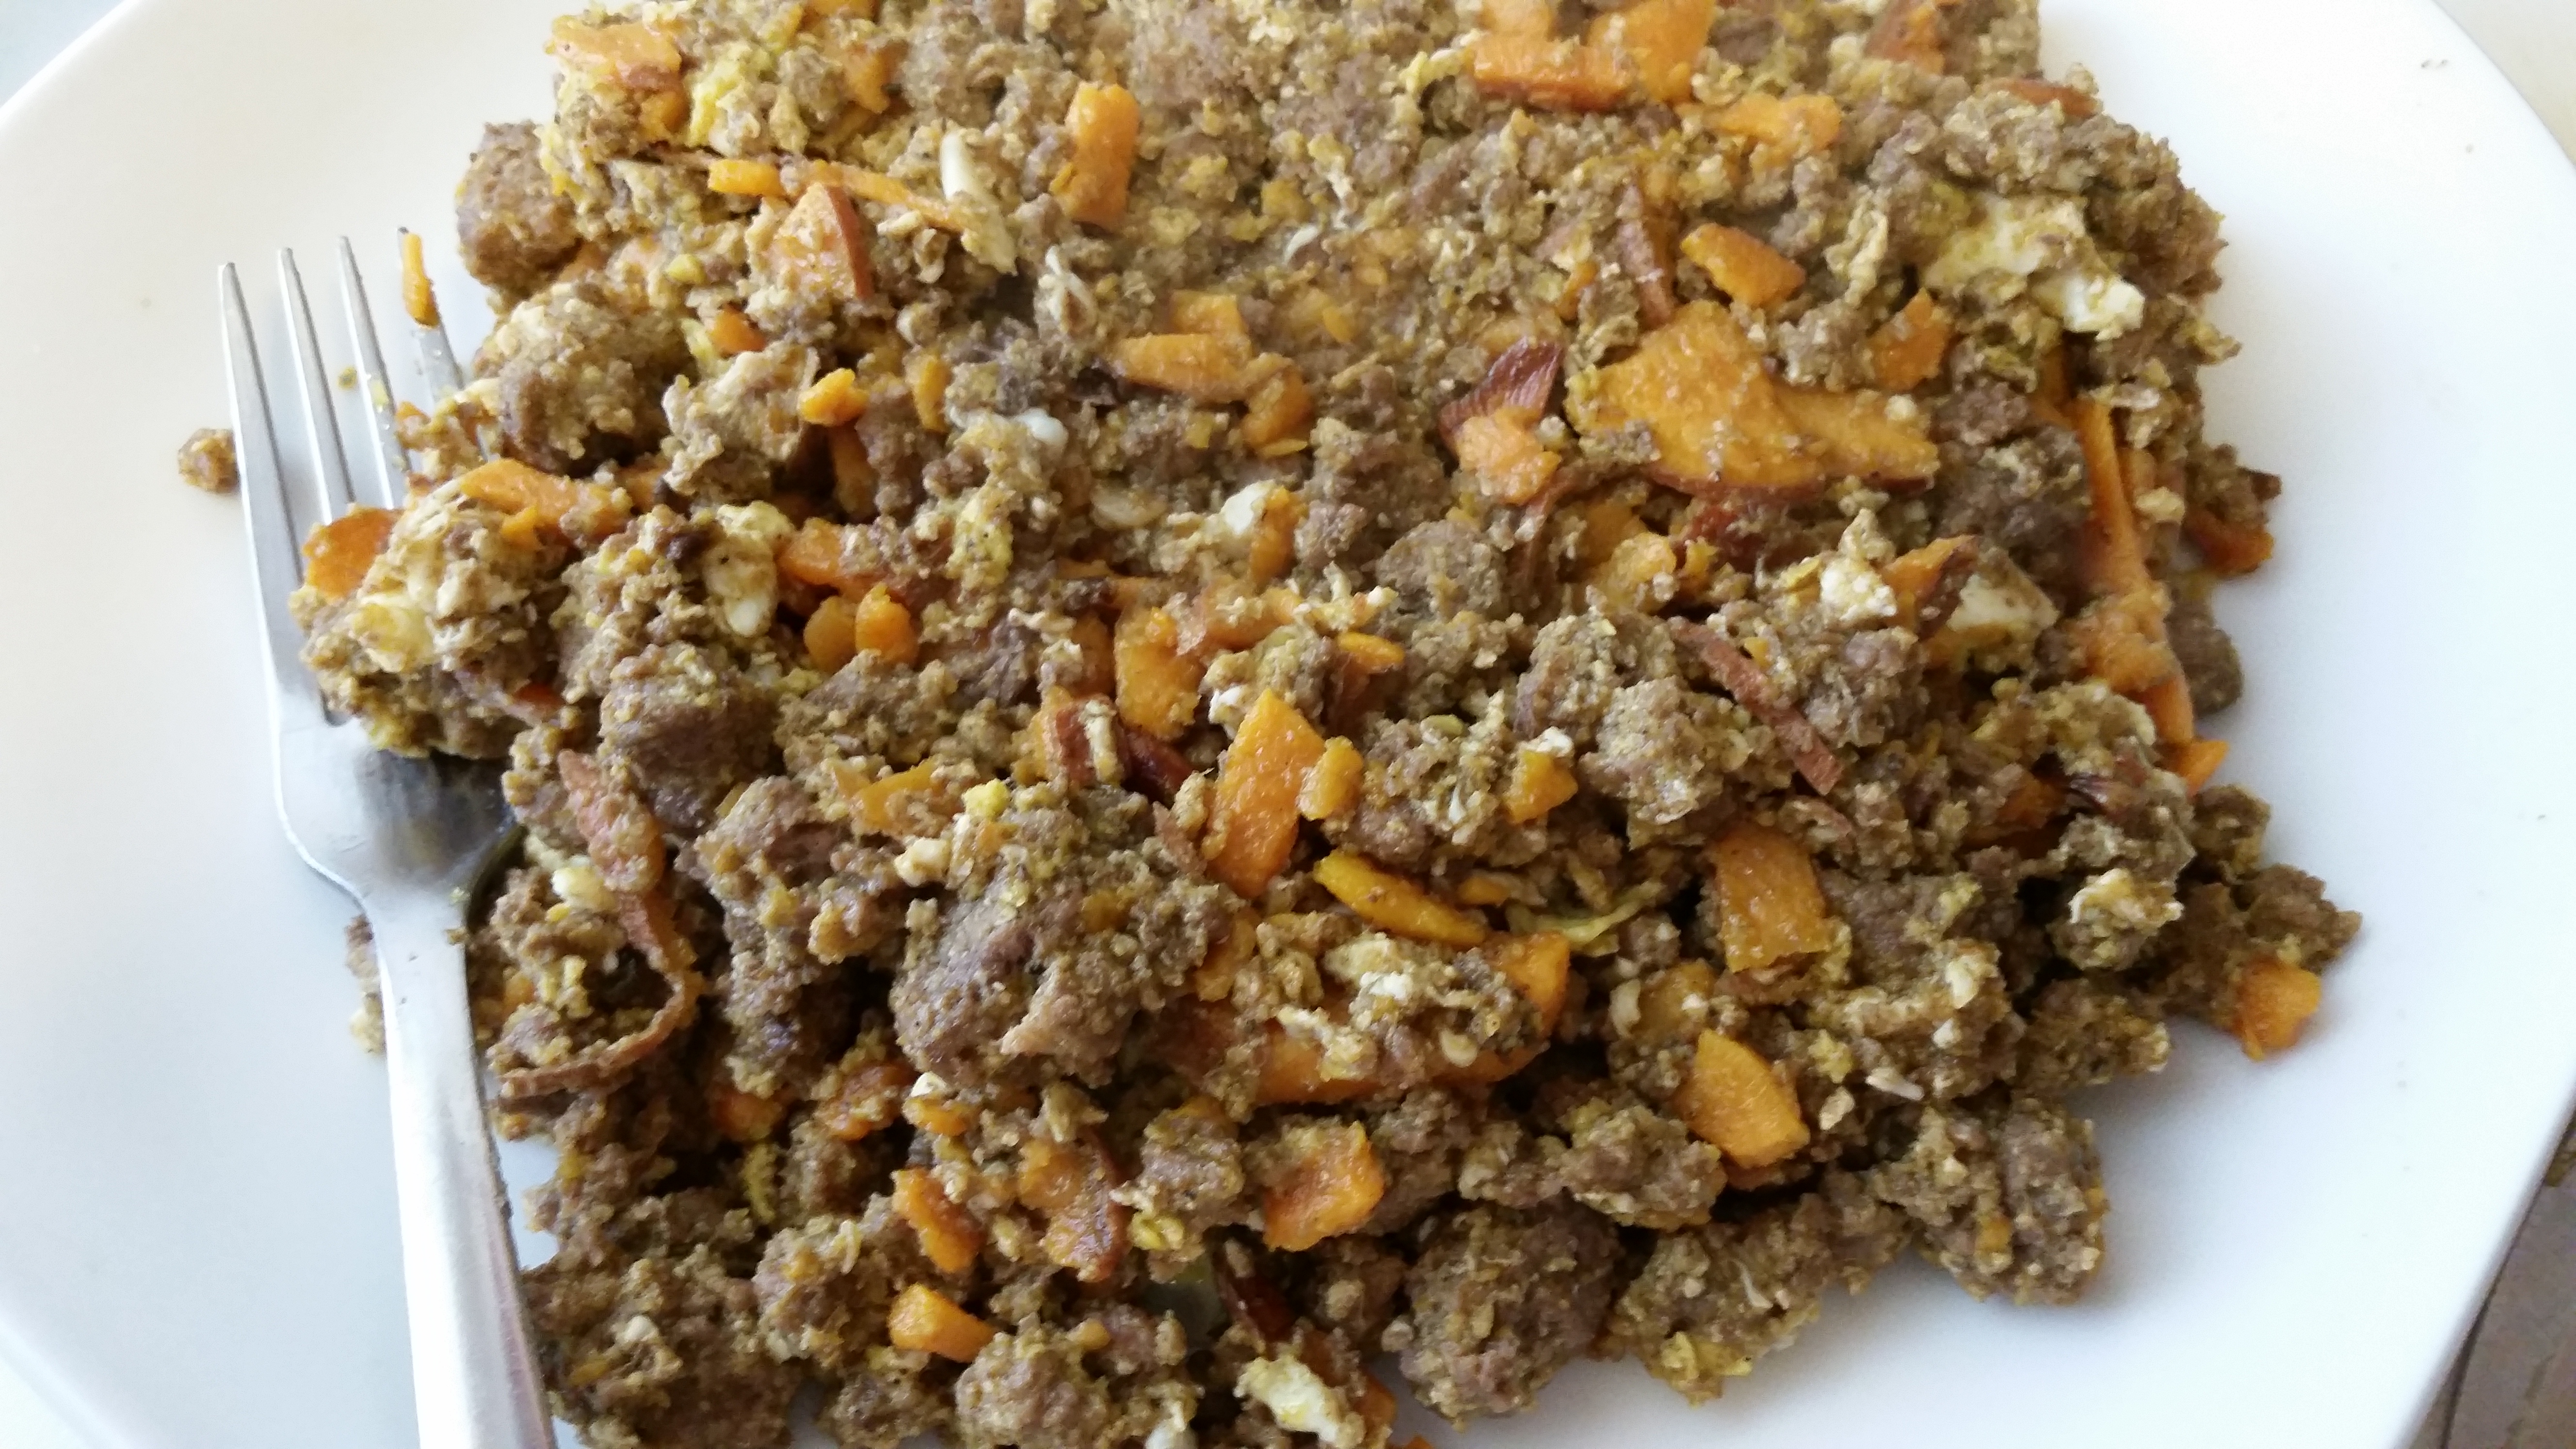 Breakfast: 11:37 a.m. | organic ground beef, sweet potatoes, eggs, red palm oil, ghee, herbs & spices